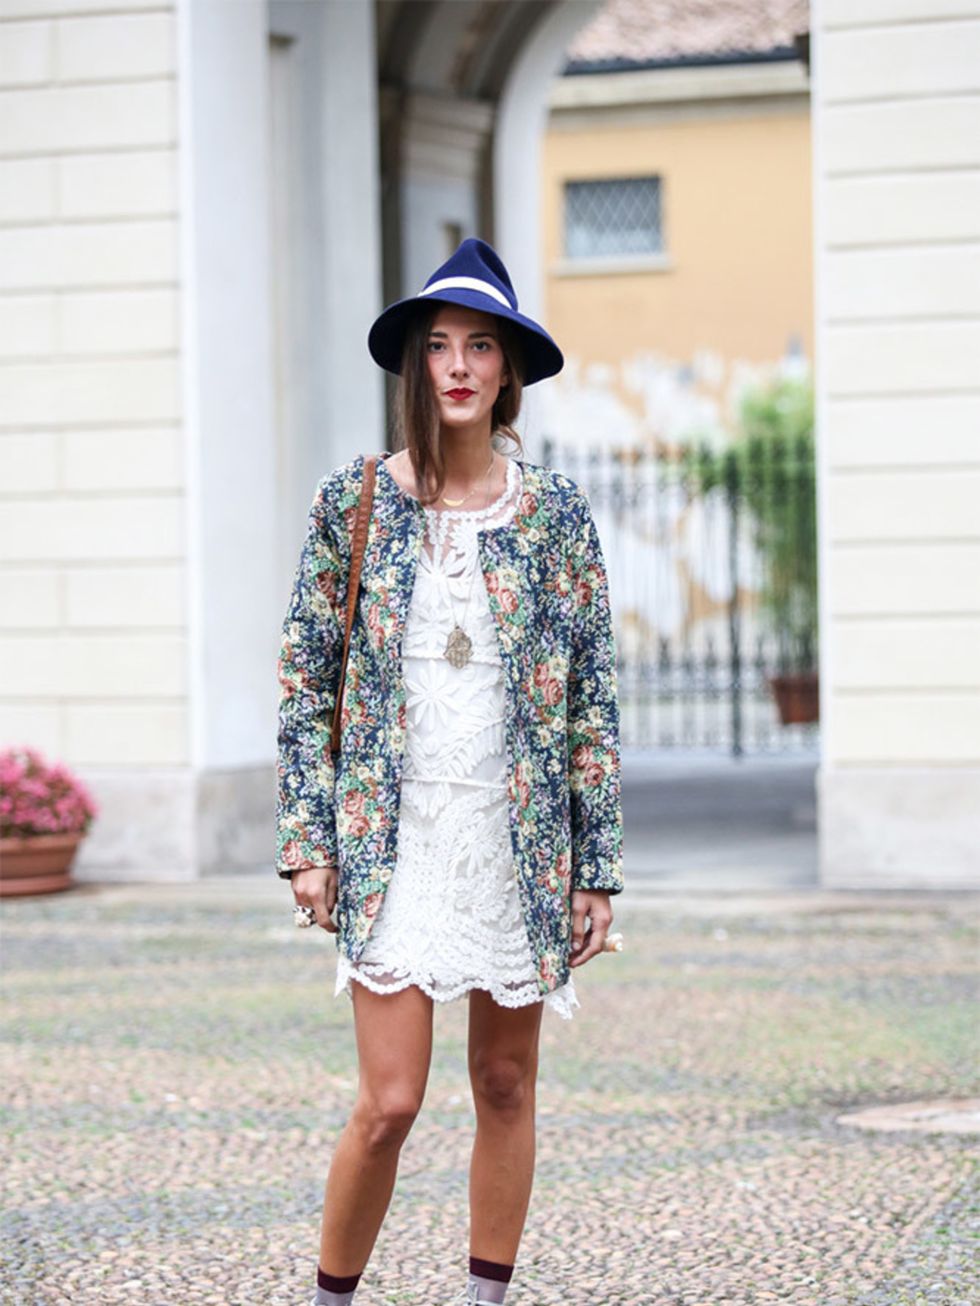 Martina wears Molly dress, vintage hat, jacket from her boutique Noftalinam with Converse trainers.